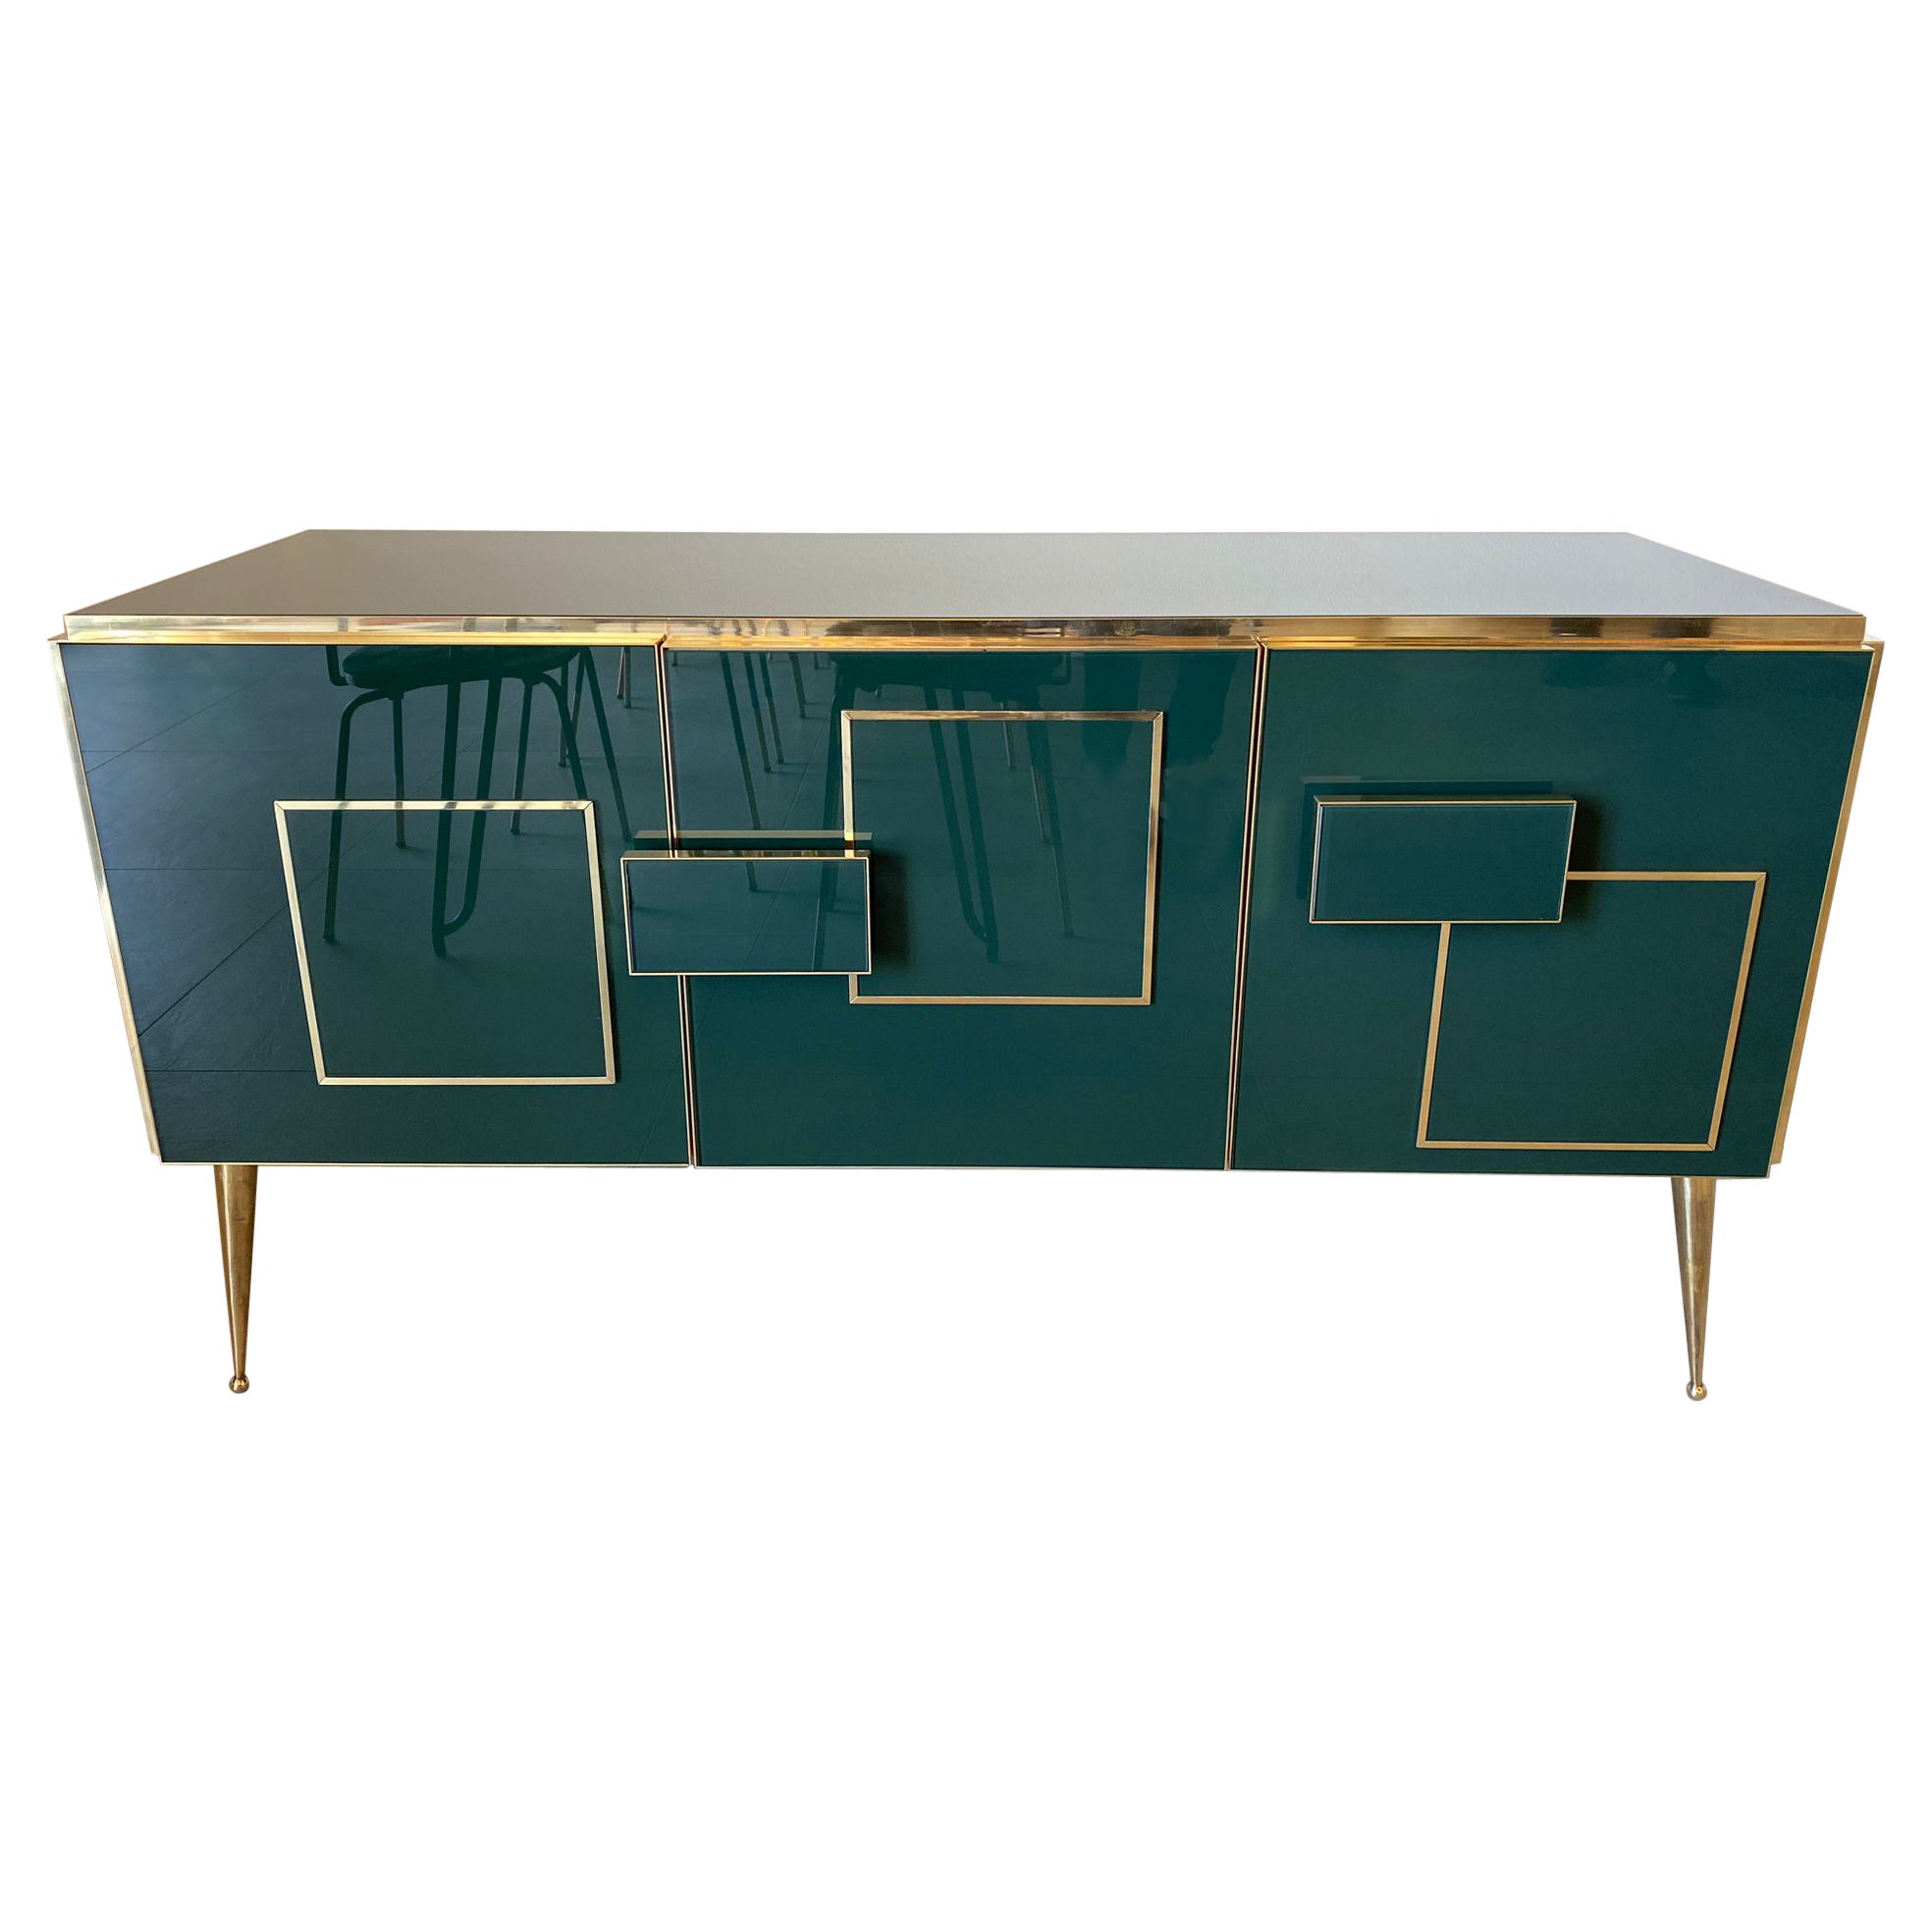 Italian Contemporary Green Murano Glass, Brass and Wood Sideboard